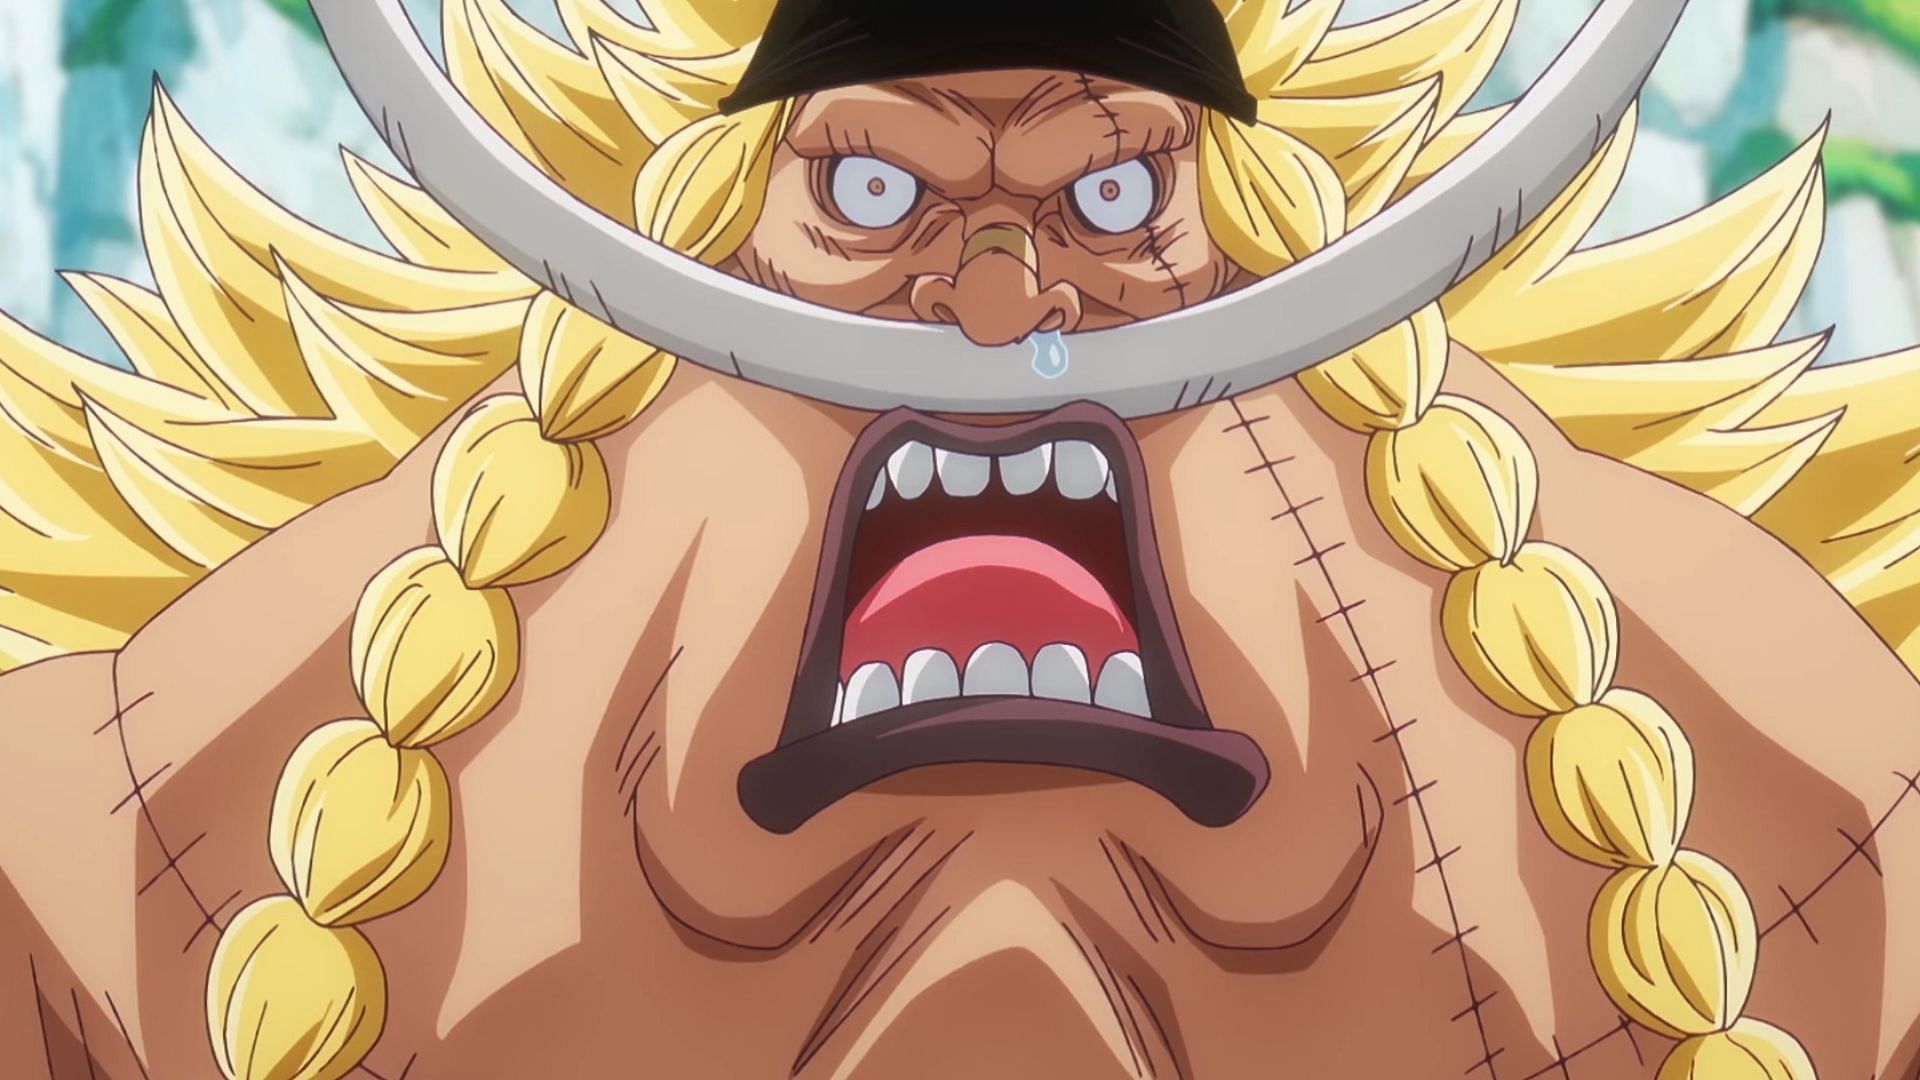 Weevil as seen in One Piece episode 1105 (Image via Toei Animation)